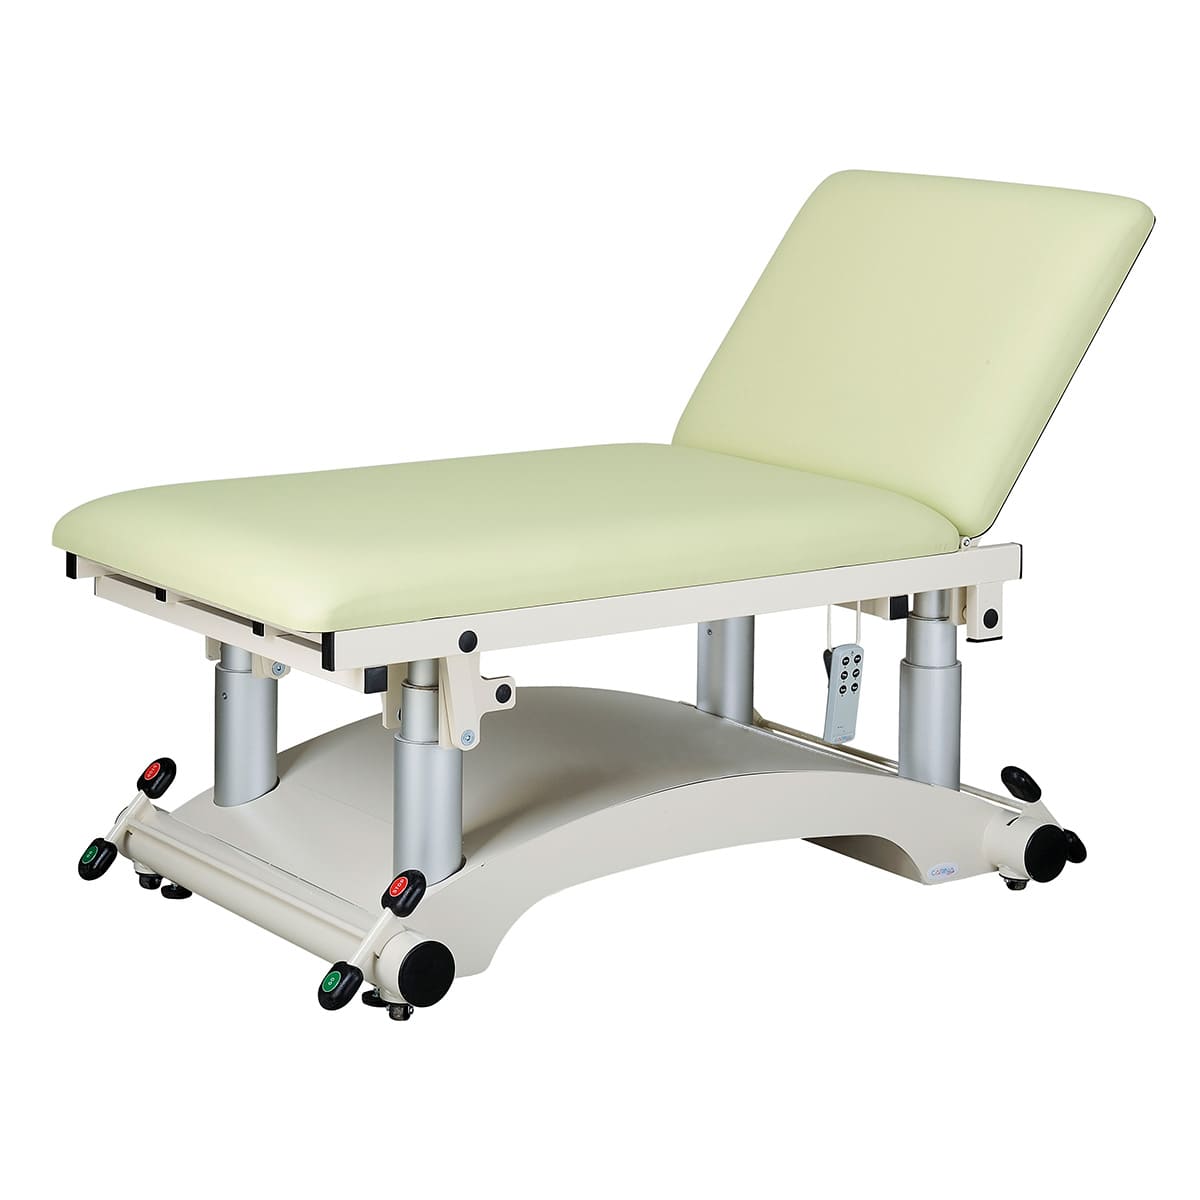 Examination couch width 90cm, hand remote